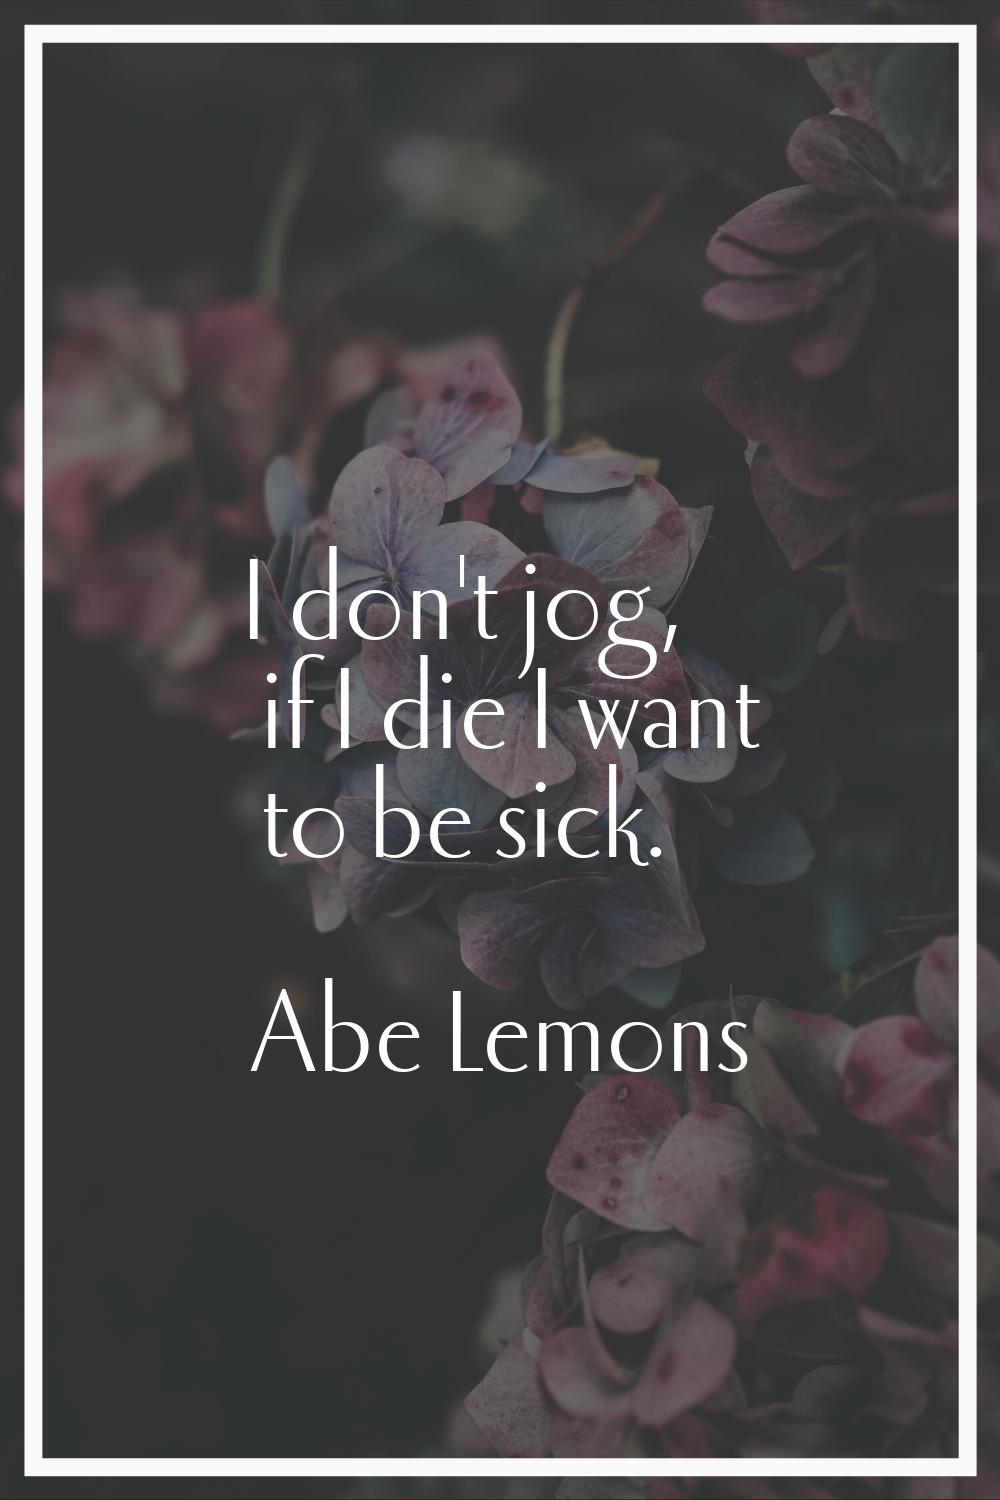 I don't jog, if I die I want to be sick.